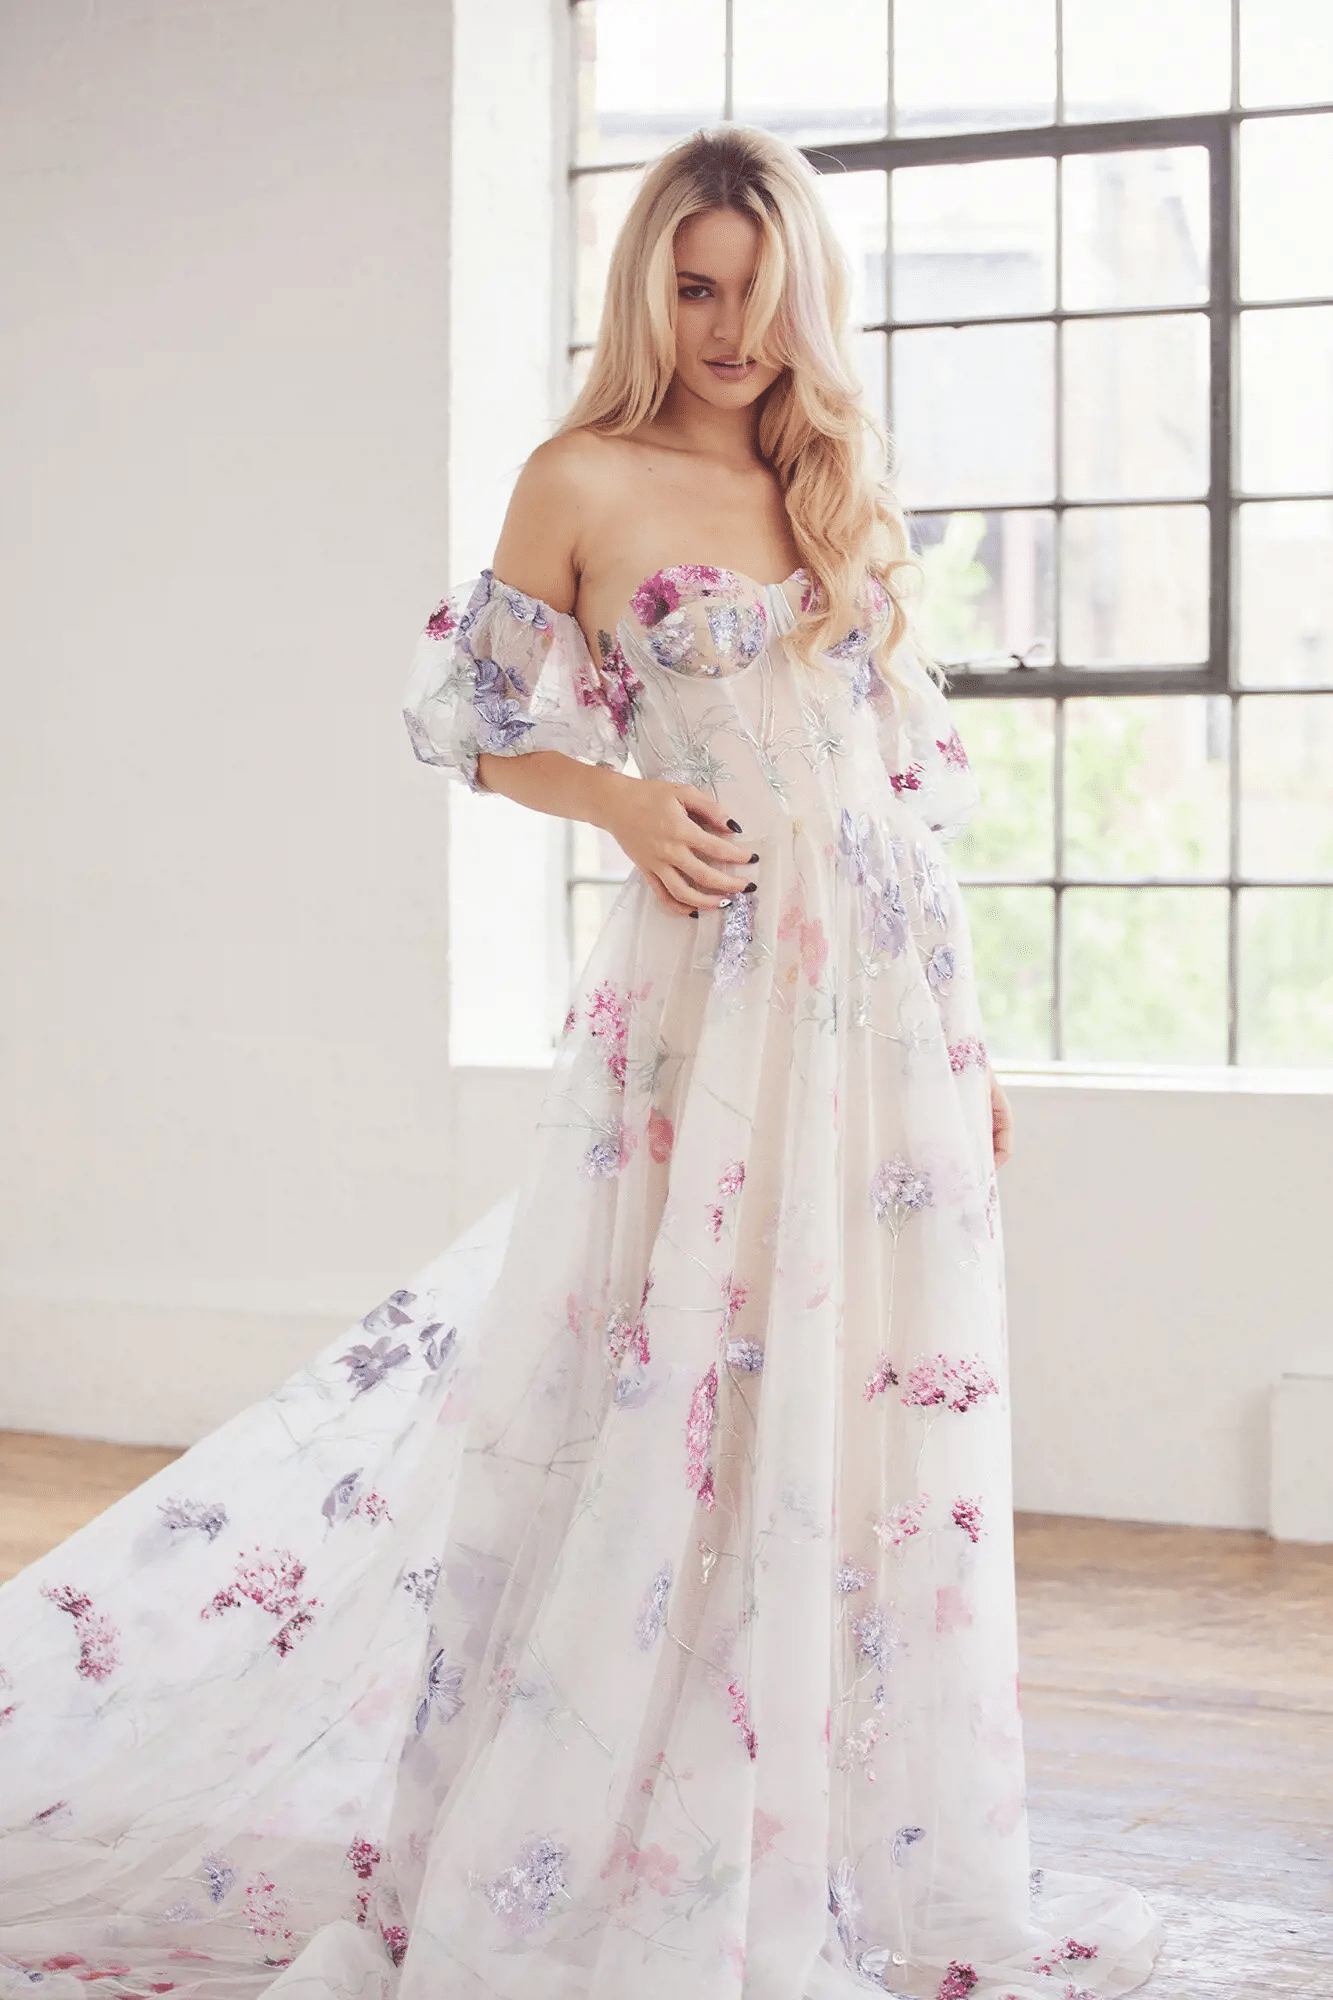 11 Floral Embroidered Wedding Dresses To Make A Statement - Wedding Journal